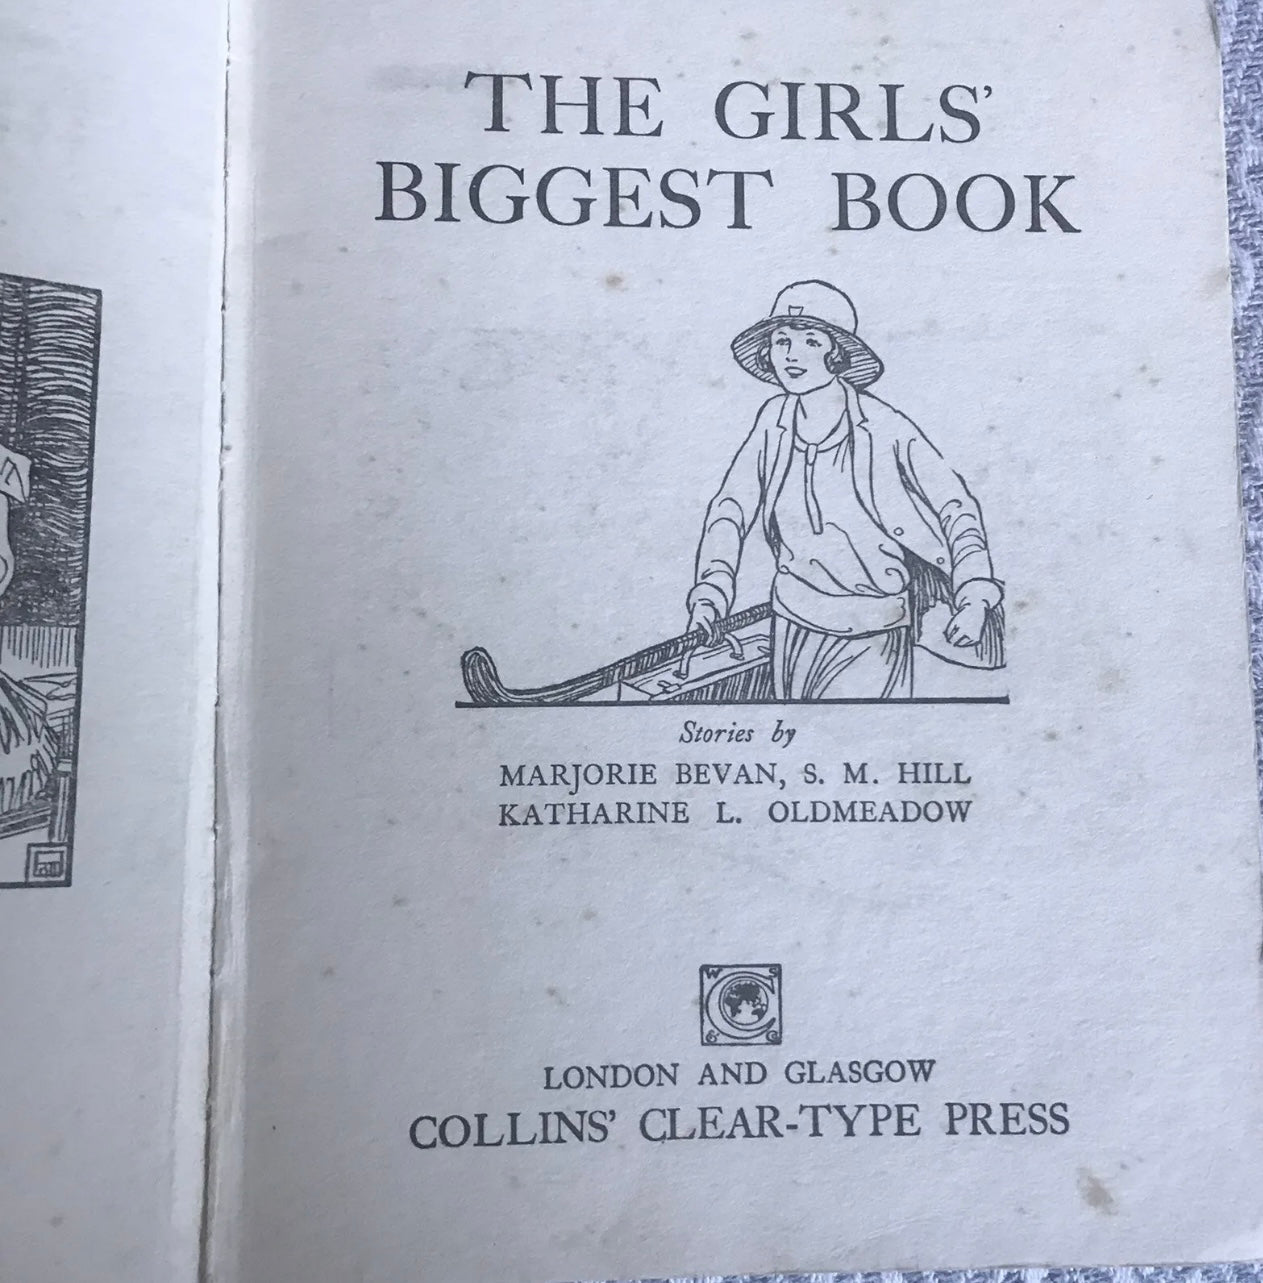 1950’s The Girls Biggest Book(Collins Cleartype) various authors & illustrators Honeyburn Books (UK)